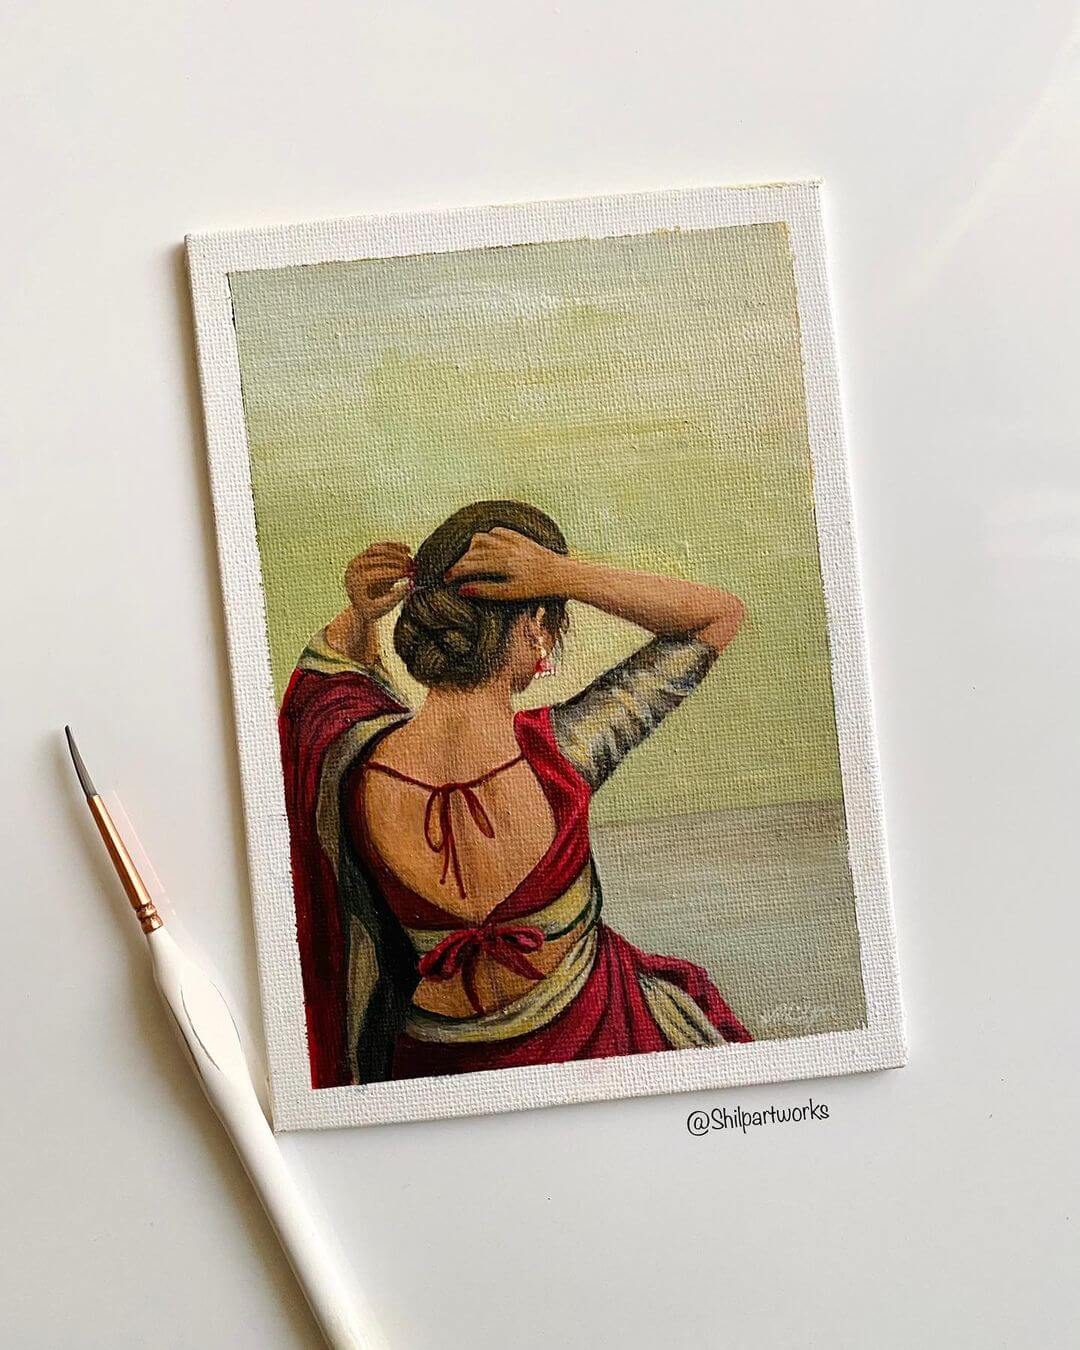 3. Painting of a woman in red tying up her hair, artwork is next to a white brush.